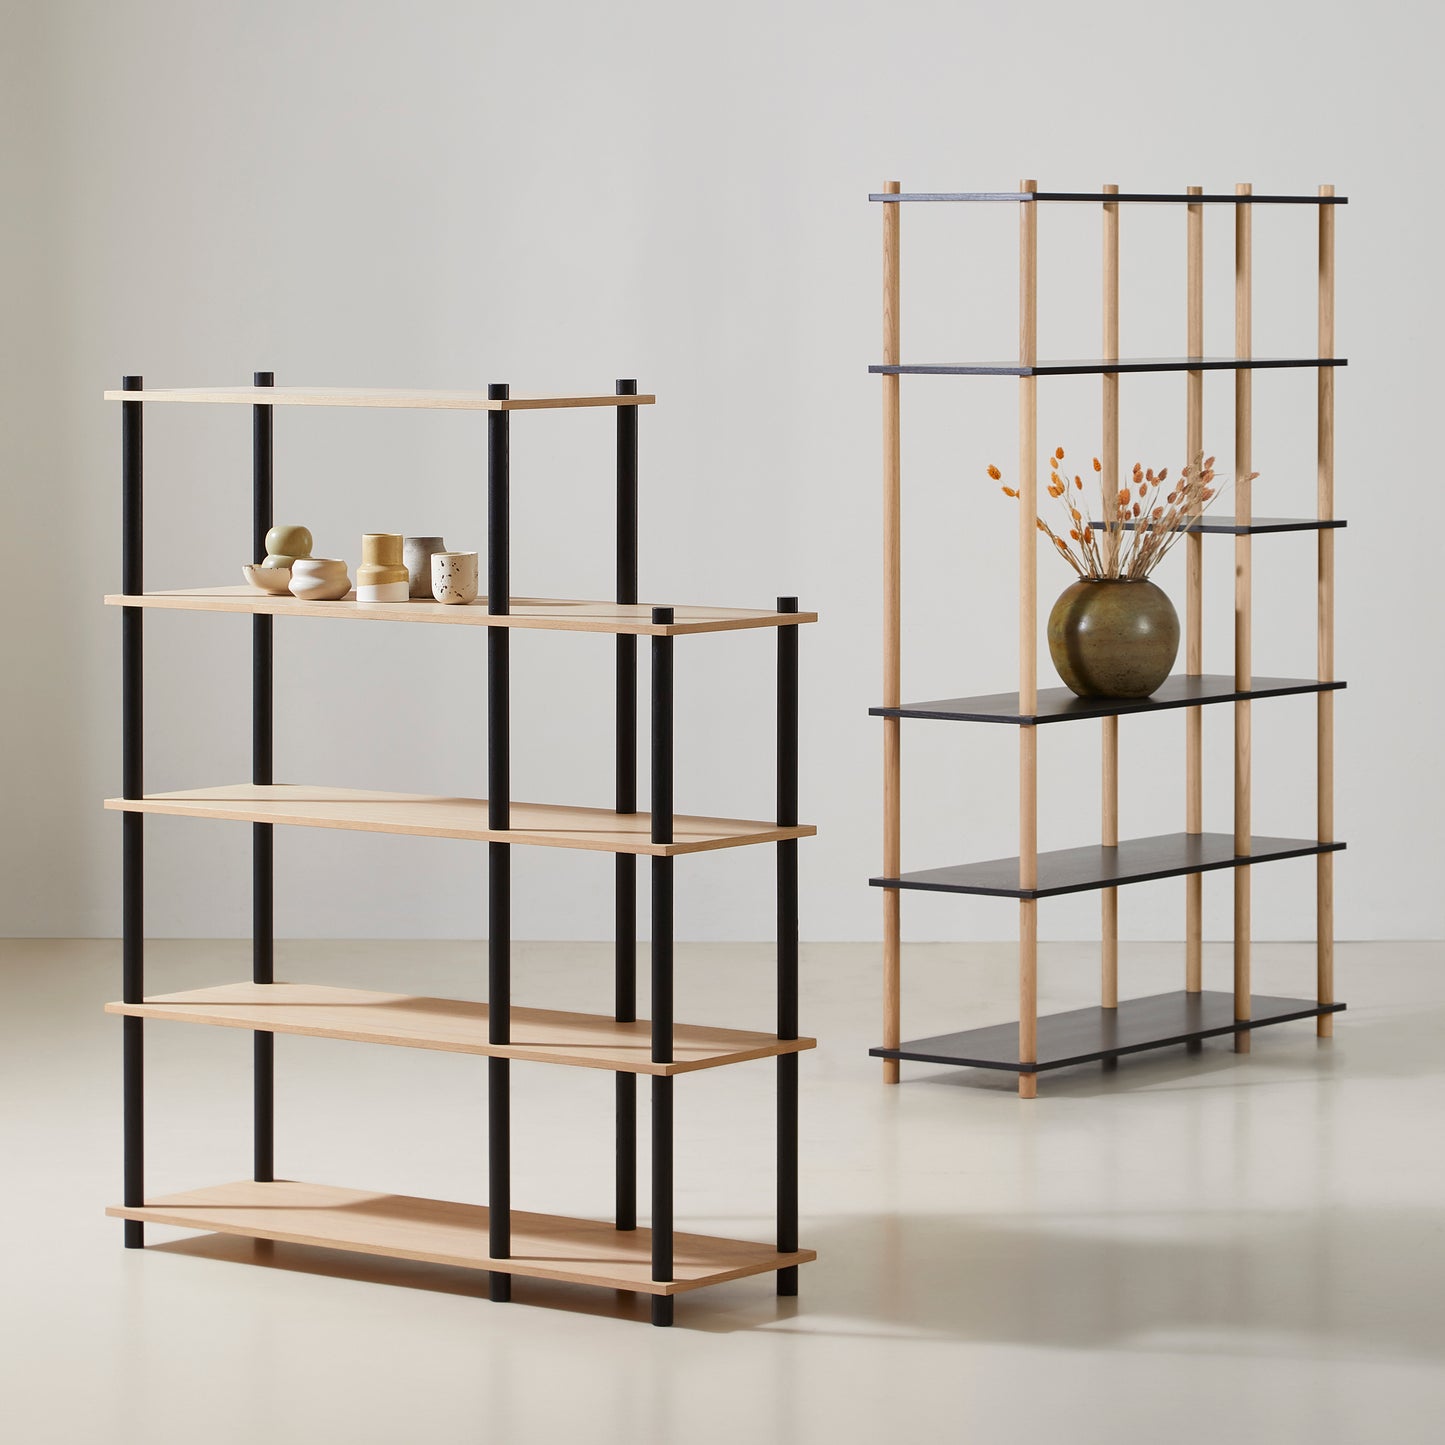 Elevate Shelving - System 12 by Woud